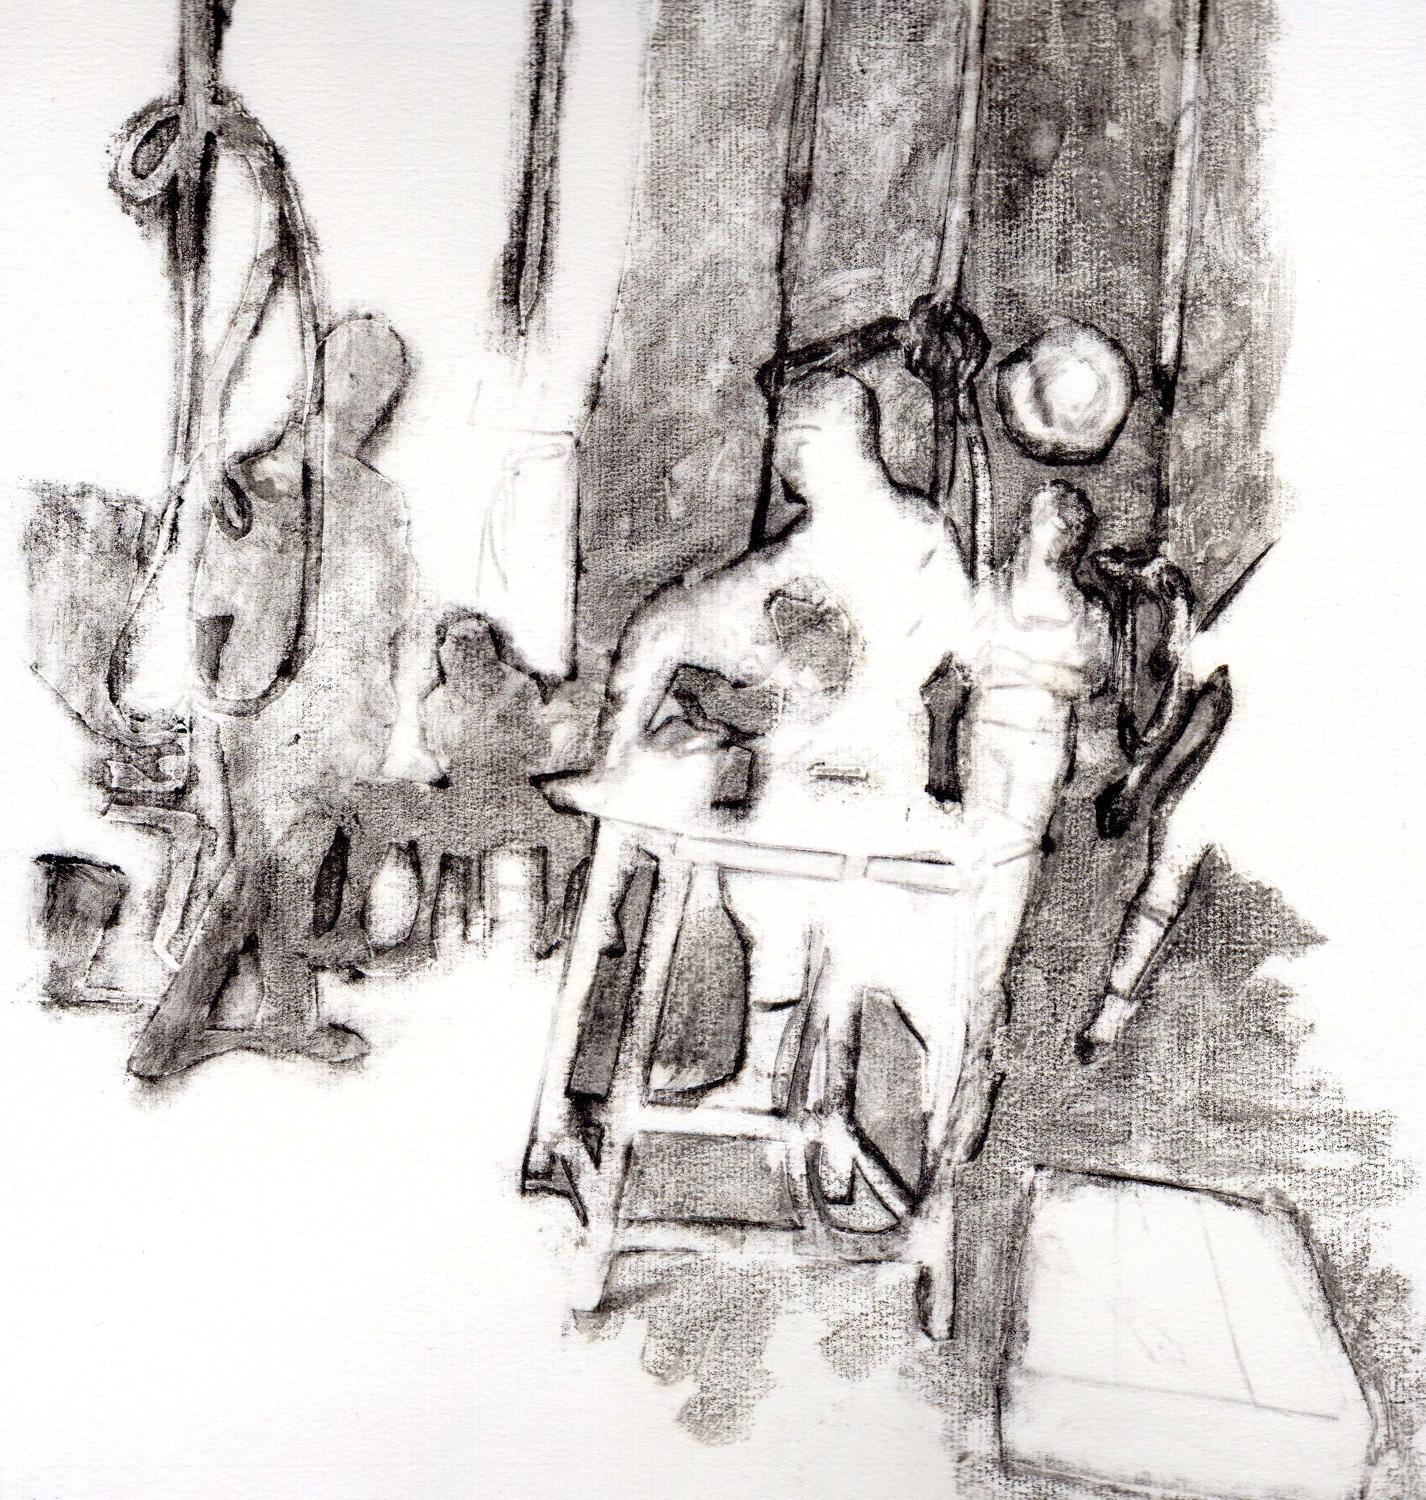 Monoprint of church bell ringers - IN THE SOUND - by Lys Flowerday